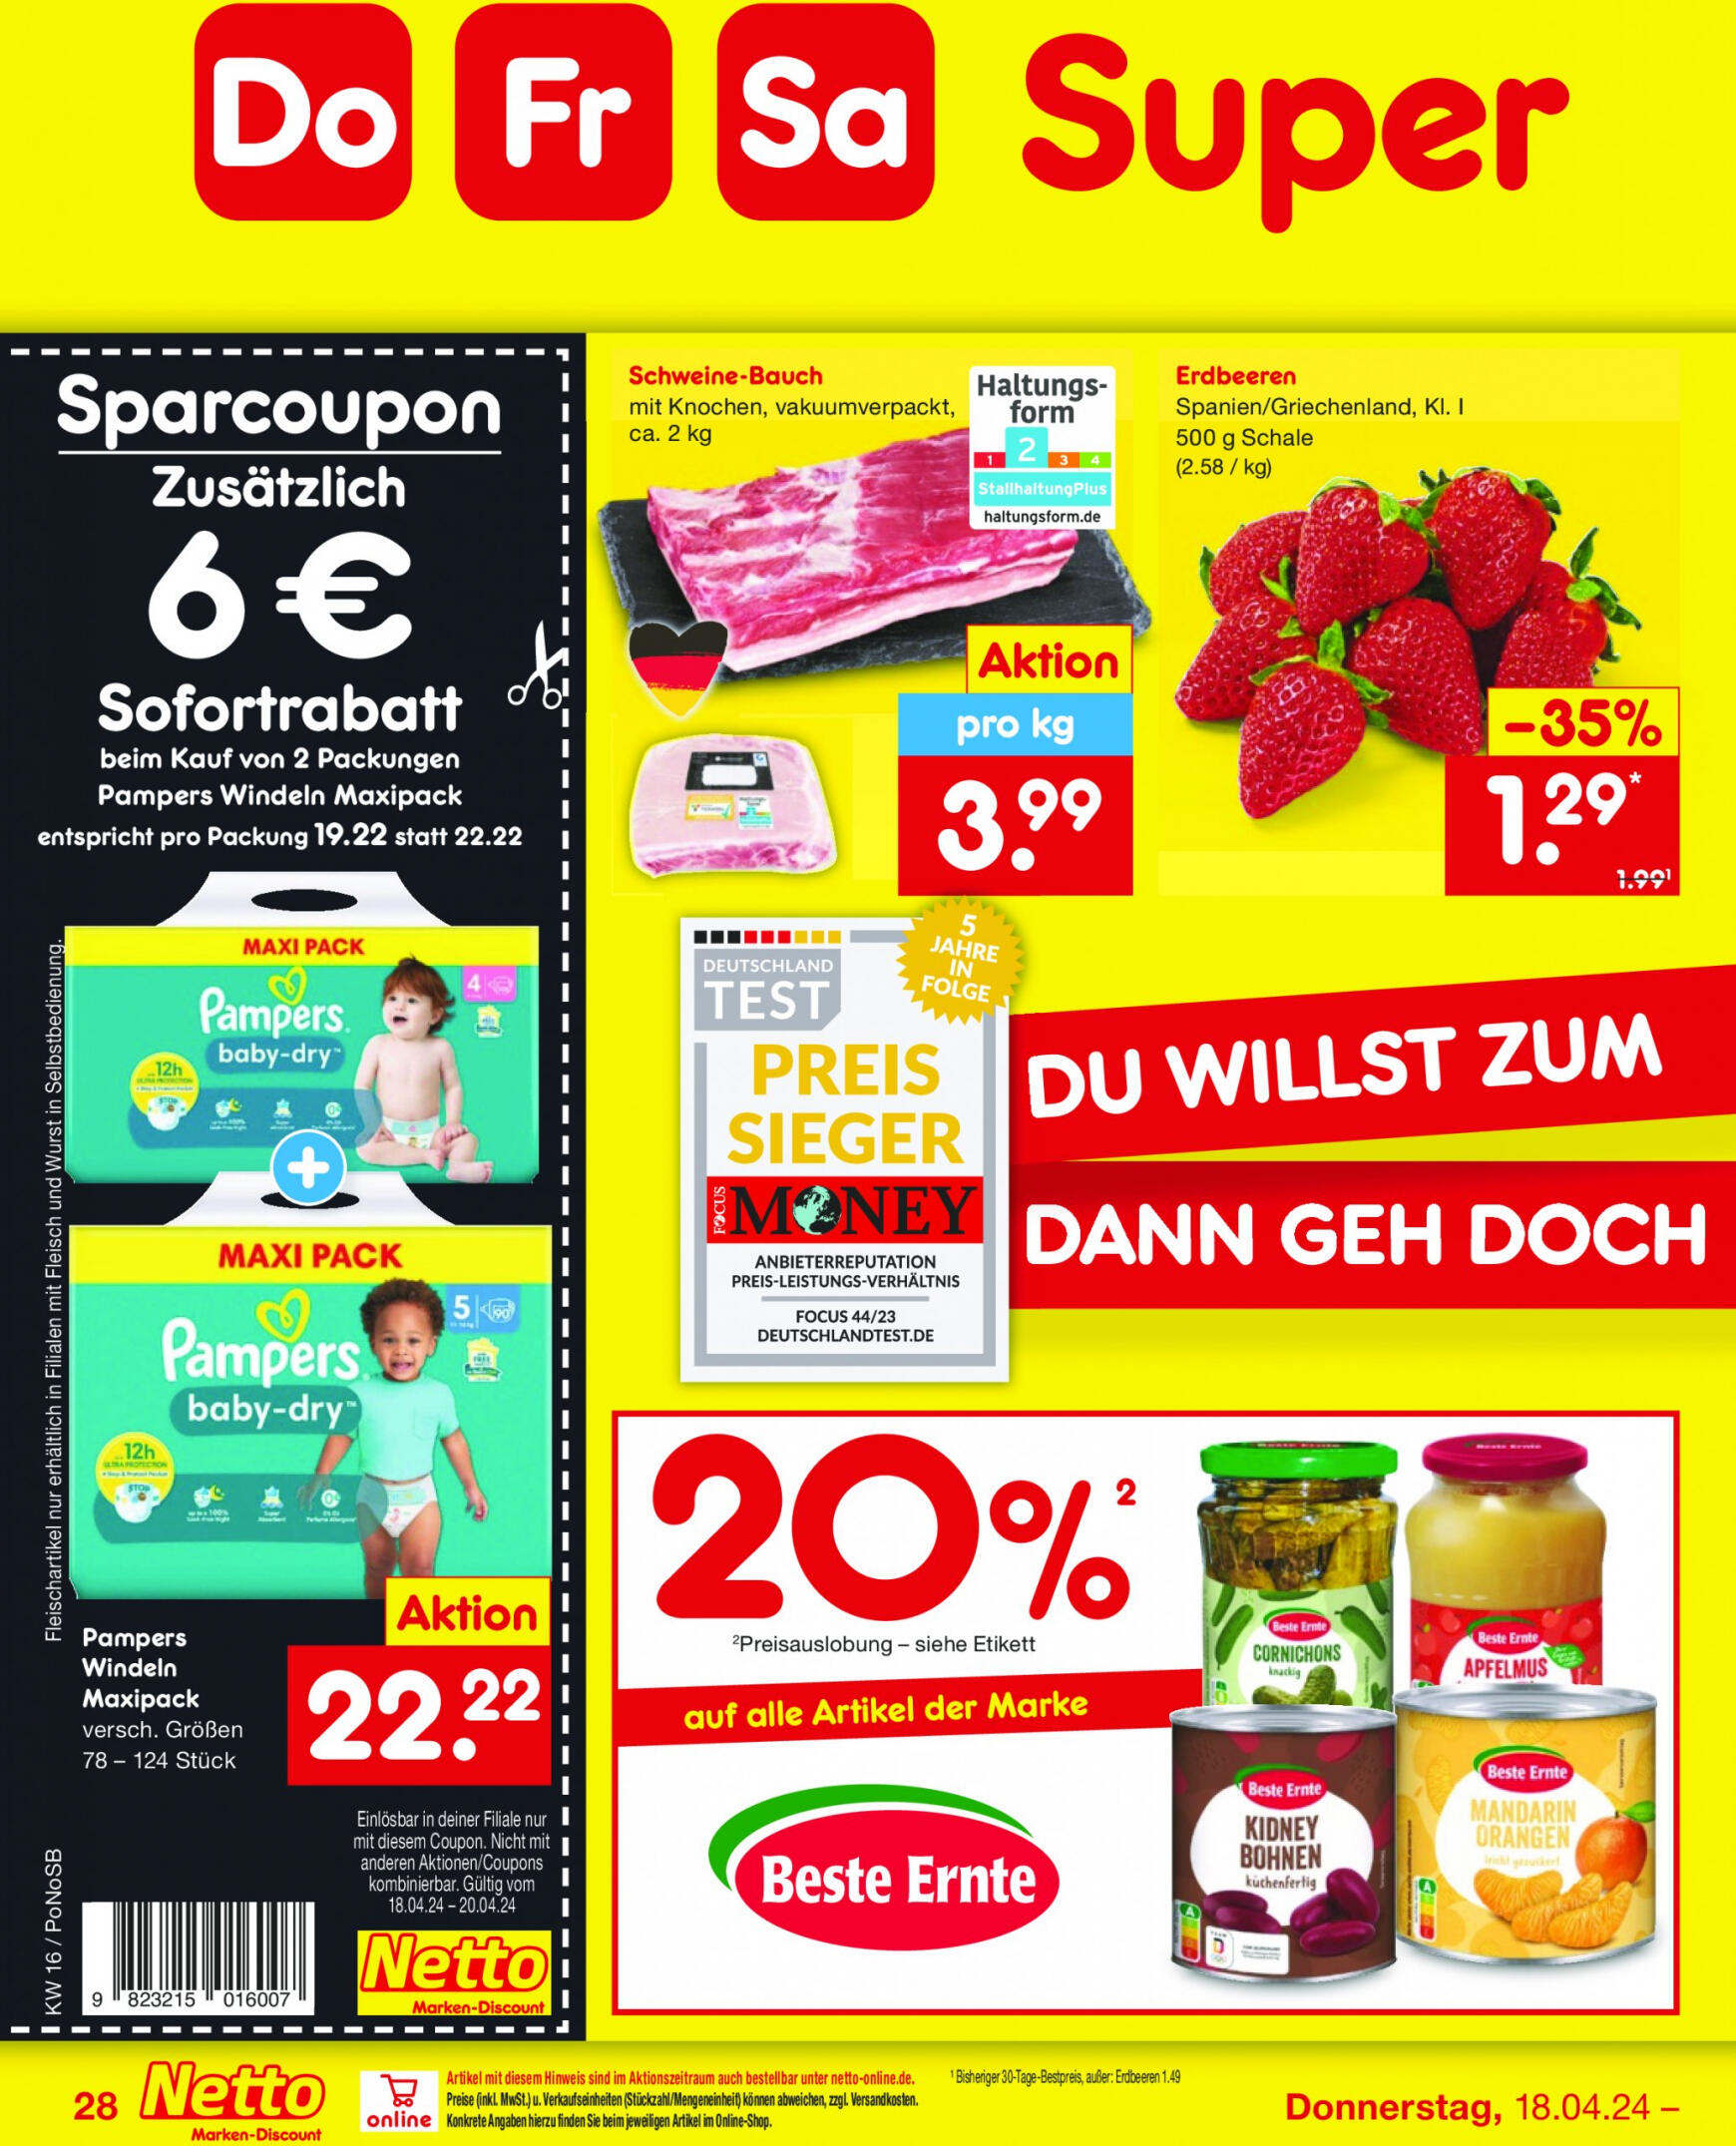 netto - Flyer Netto aktuell 15.04. - 20.04. - page: 34